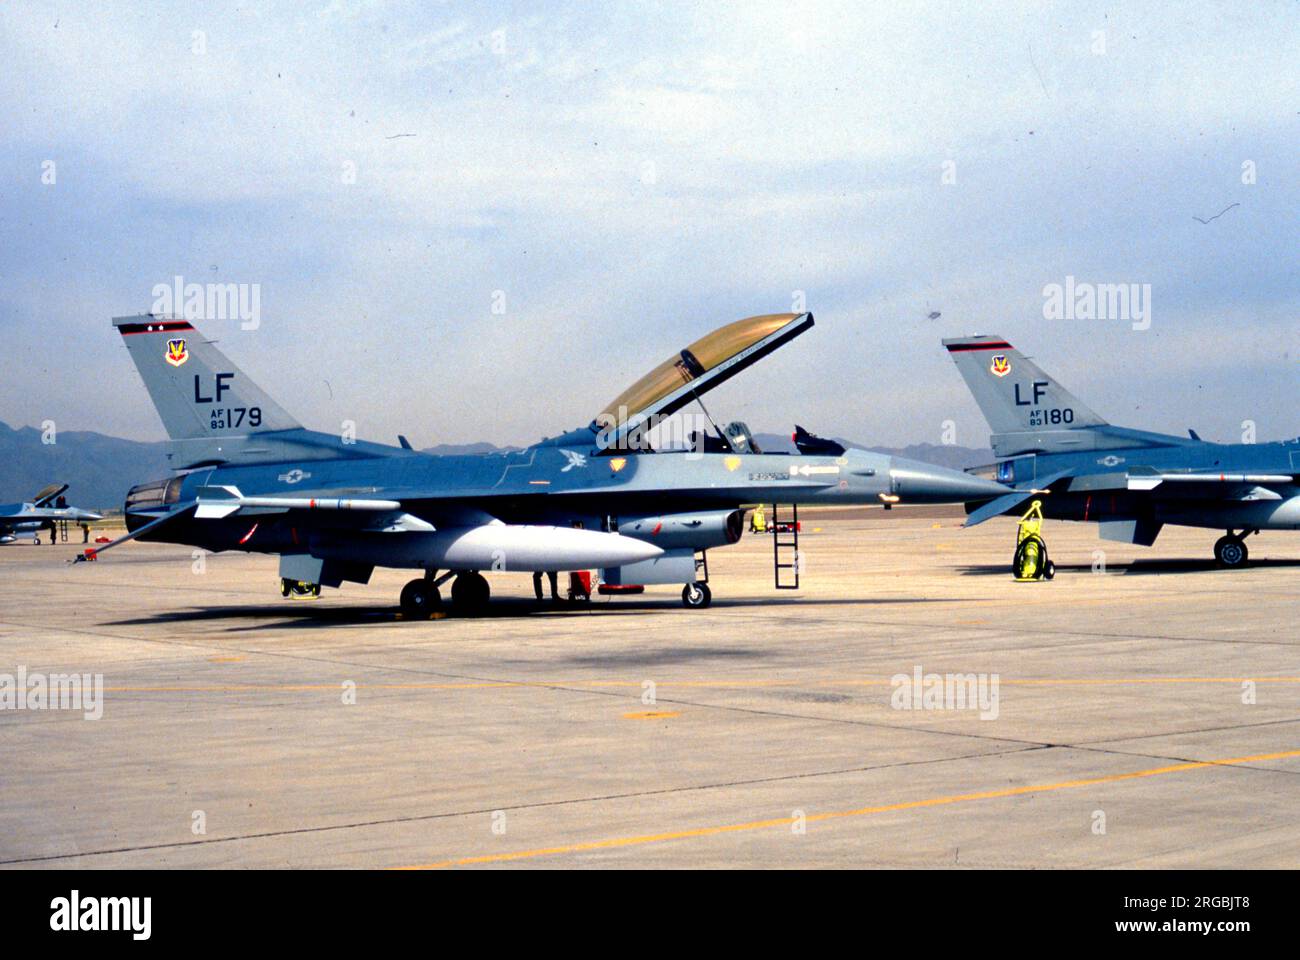 United States Air Force (USAF) - General Dynamics F-16D Block 25A Fighting Falcon 83-1179 (msn 5D-6, codice base 'LF'), del 61st Fighter Squadron, 56th Fighter Wing, Foto Stock